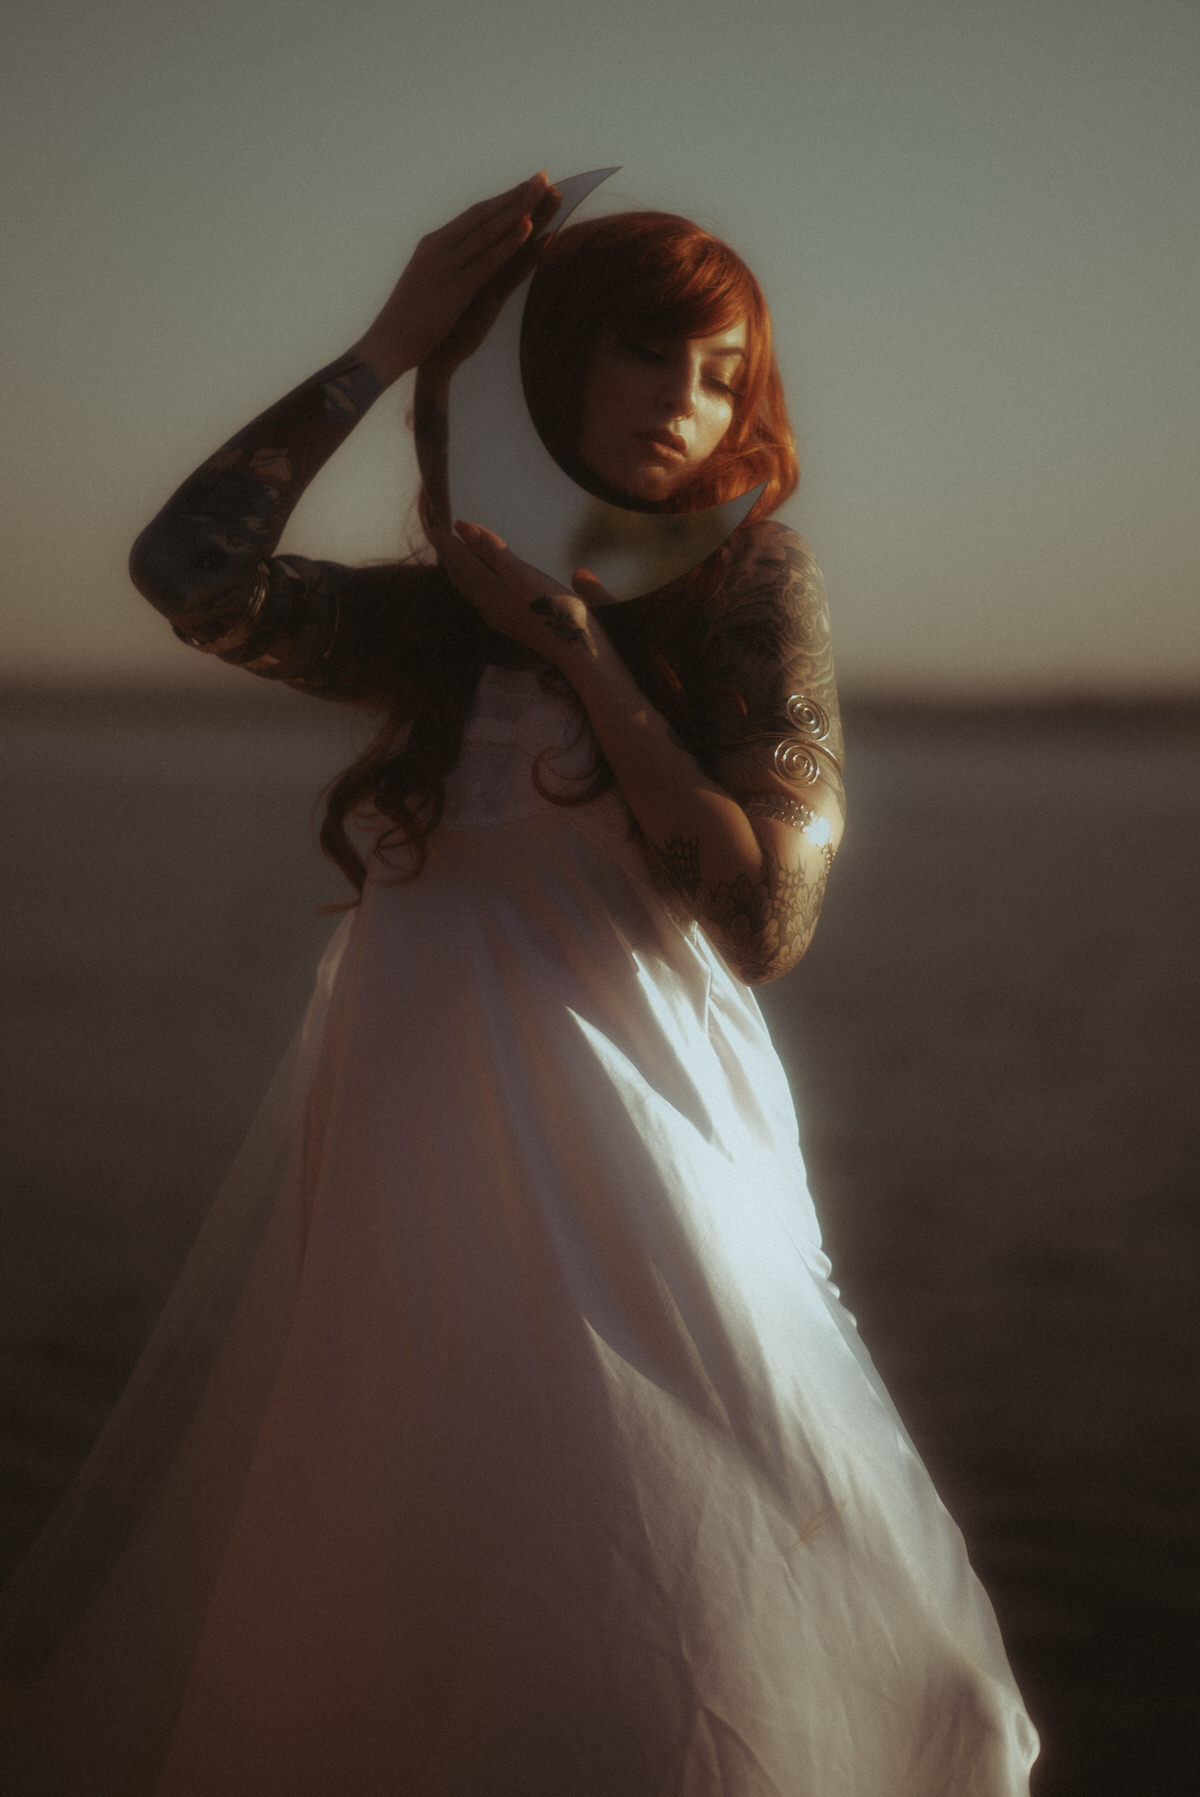 Model with red hair embracing the moon at the ocean.